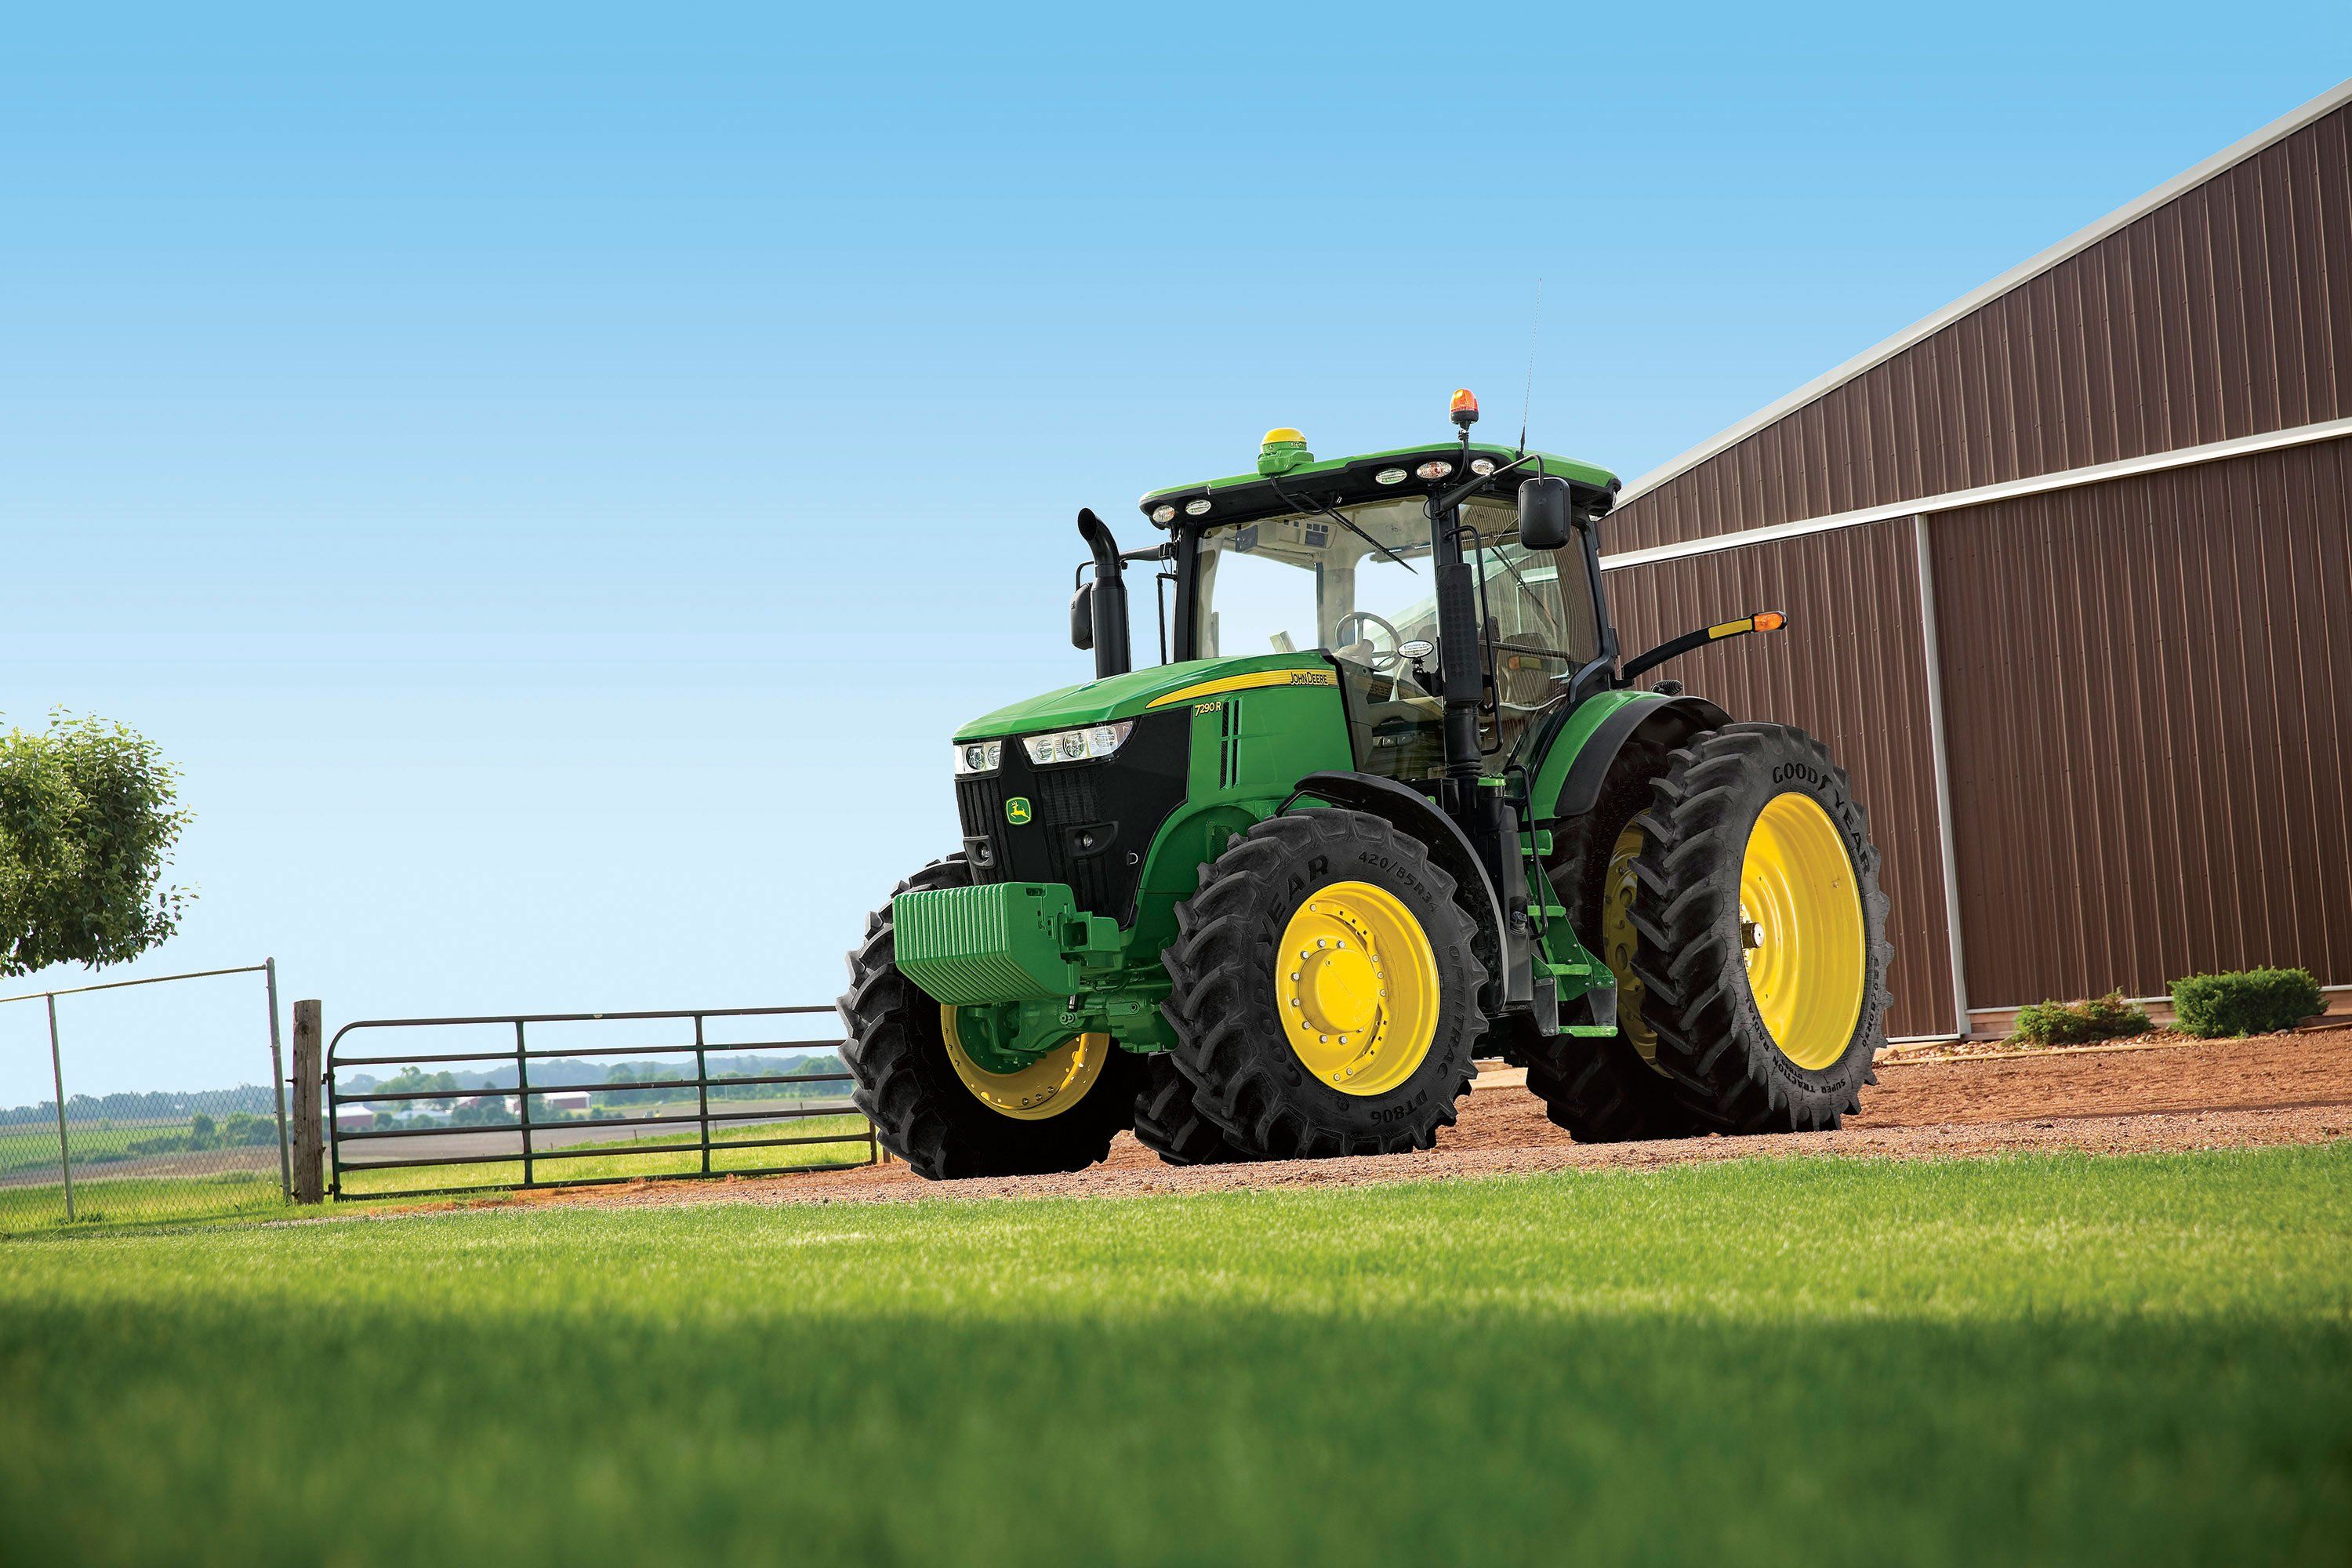 john deere wallpaper hd,land vehicle,tractor,field,vehicle,agricultural machinery